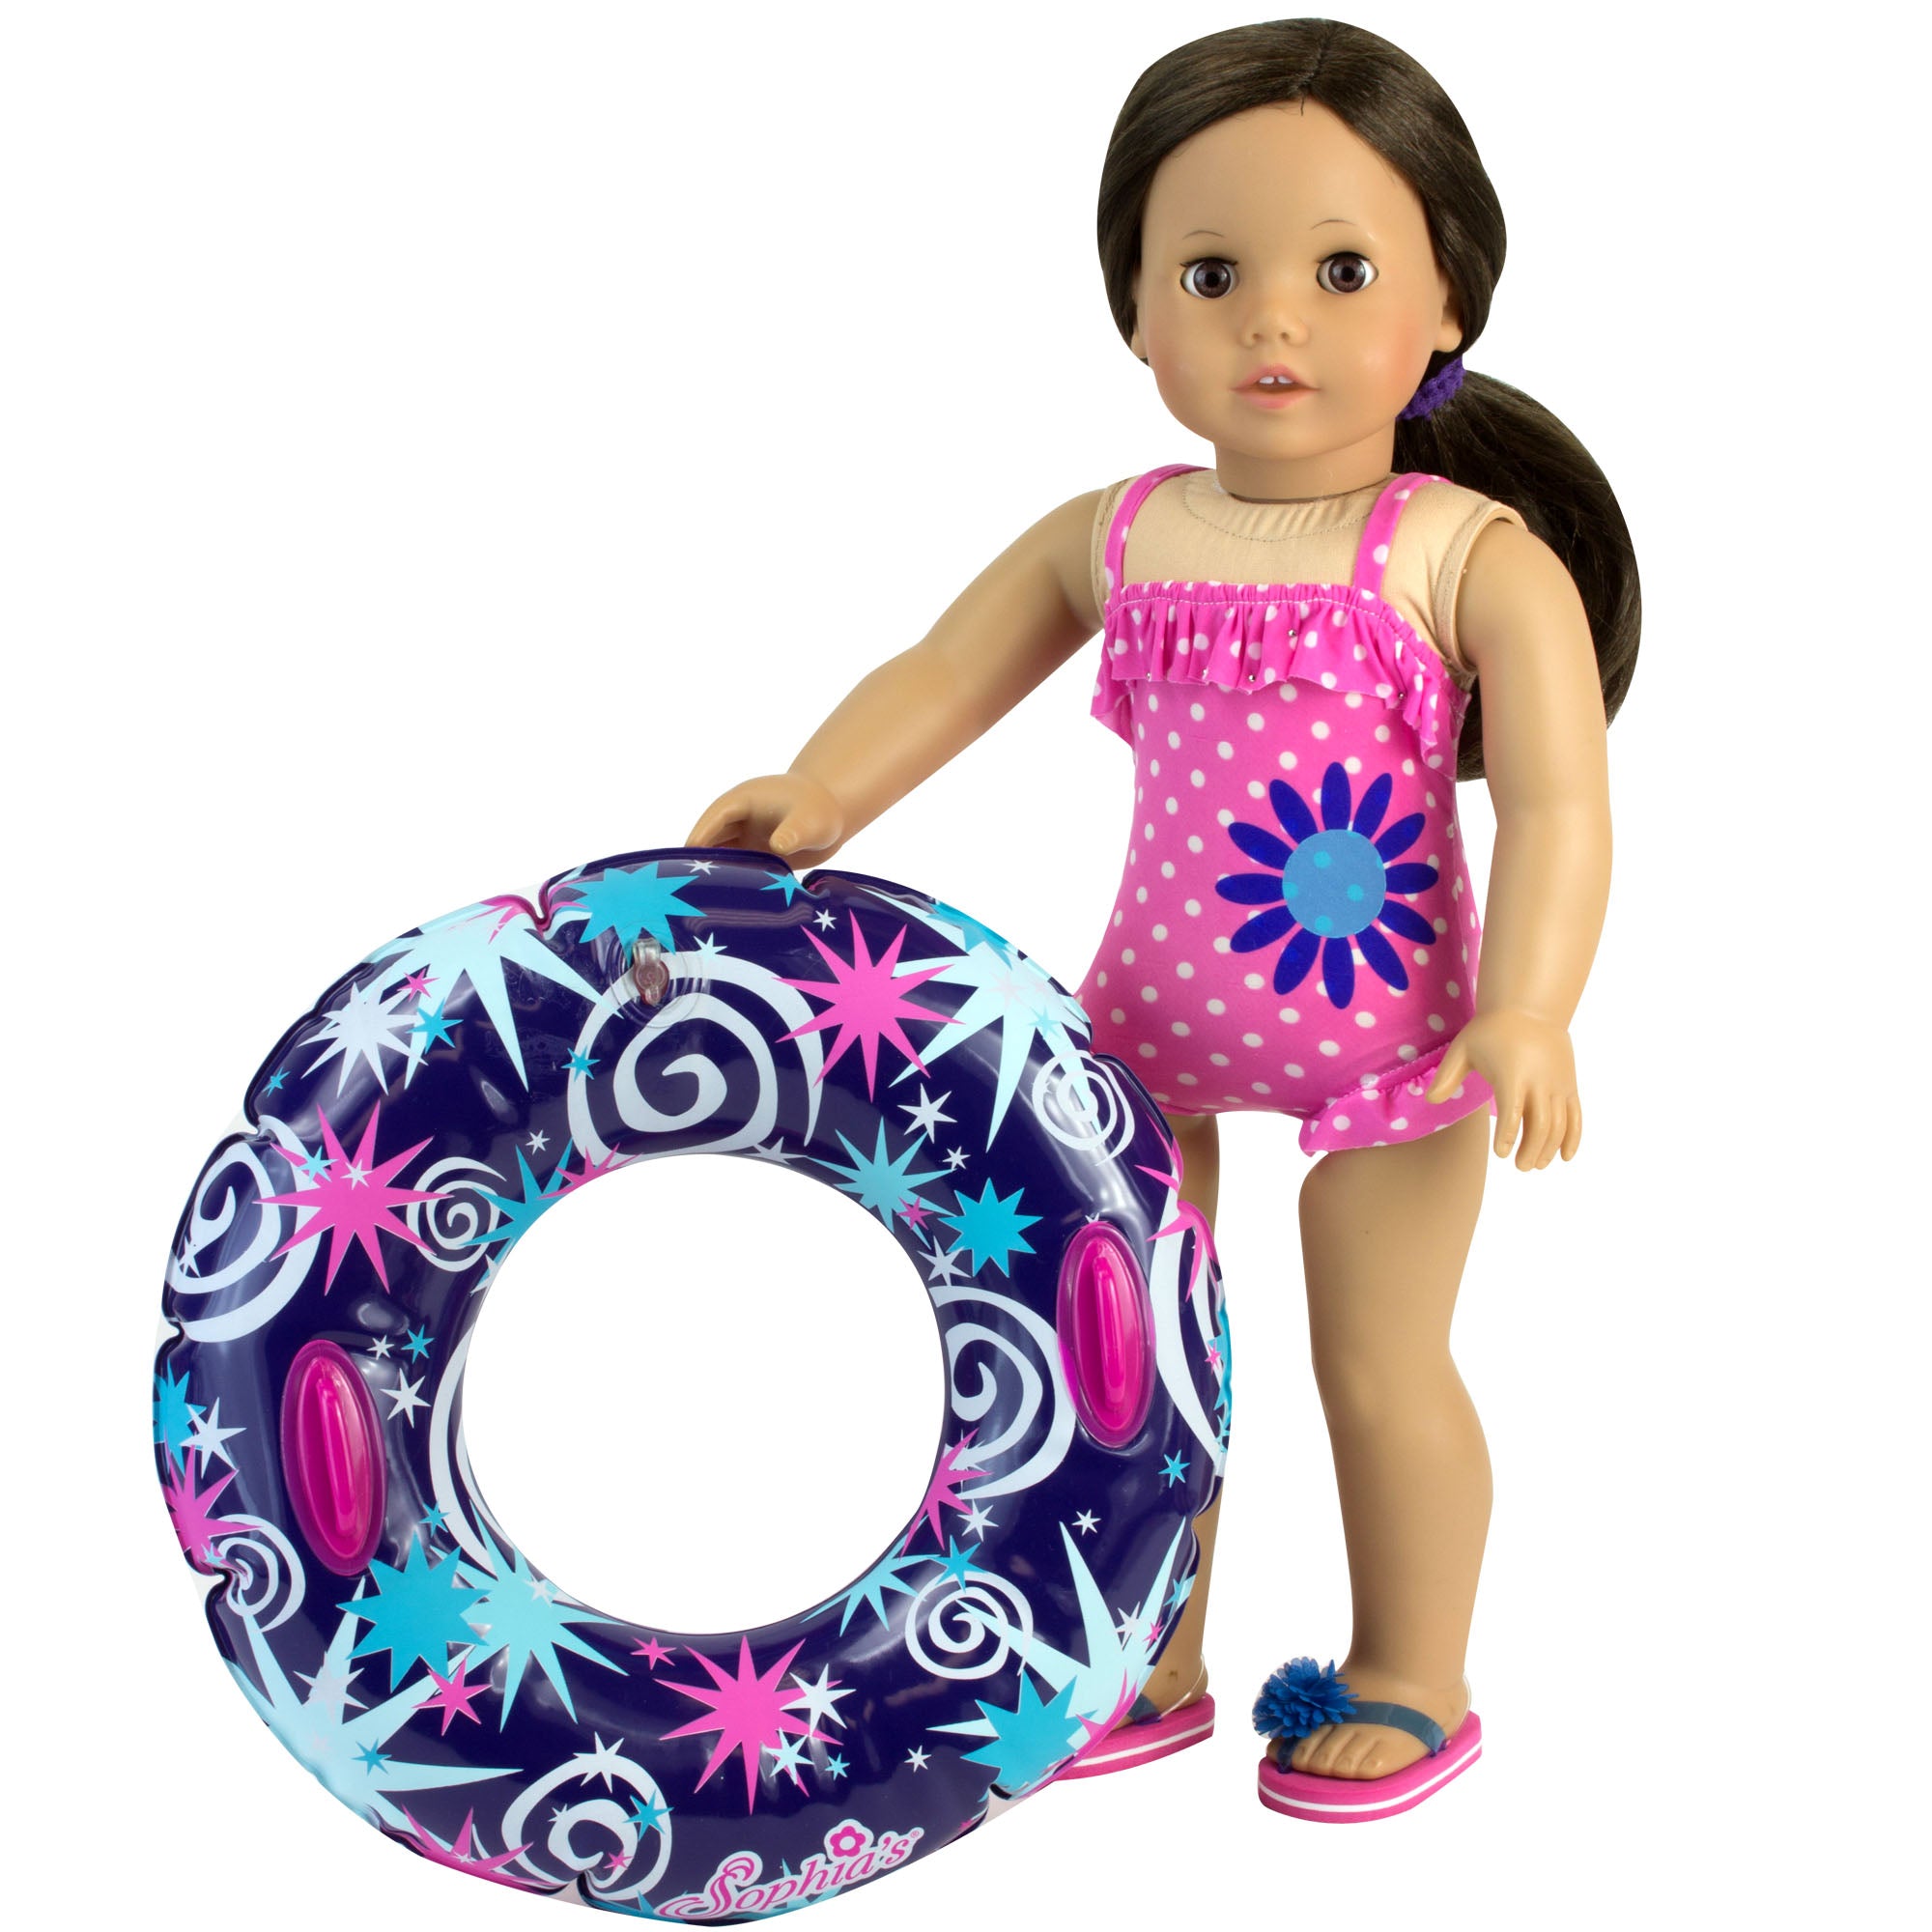 Sophia’s Ruffle Polka Dot One-Piece Bathing Suit & Included Inflatable Inner Tube Summer Pool Play Set for 18” Dolls, Hot Pink